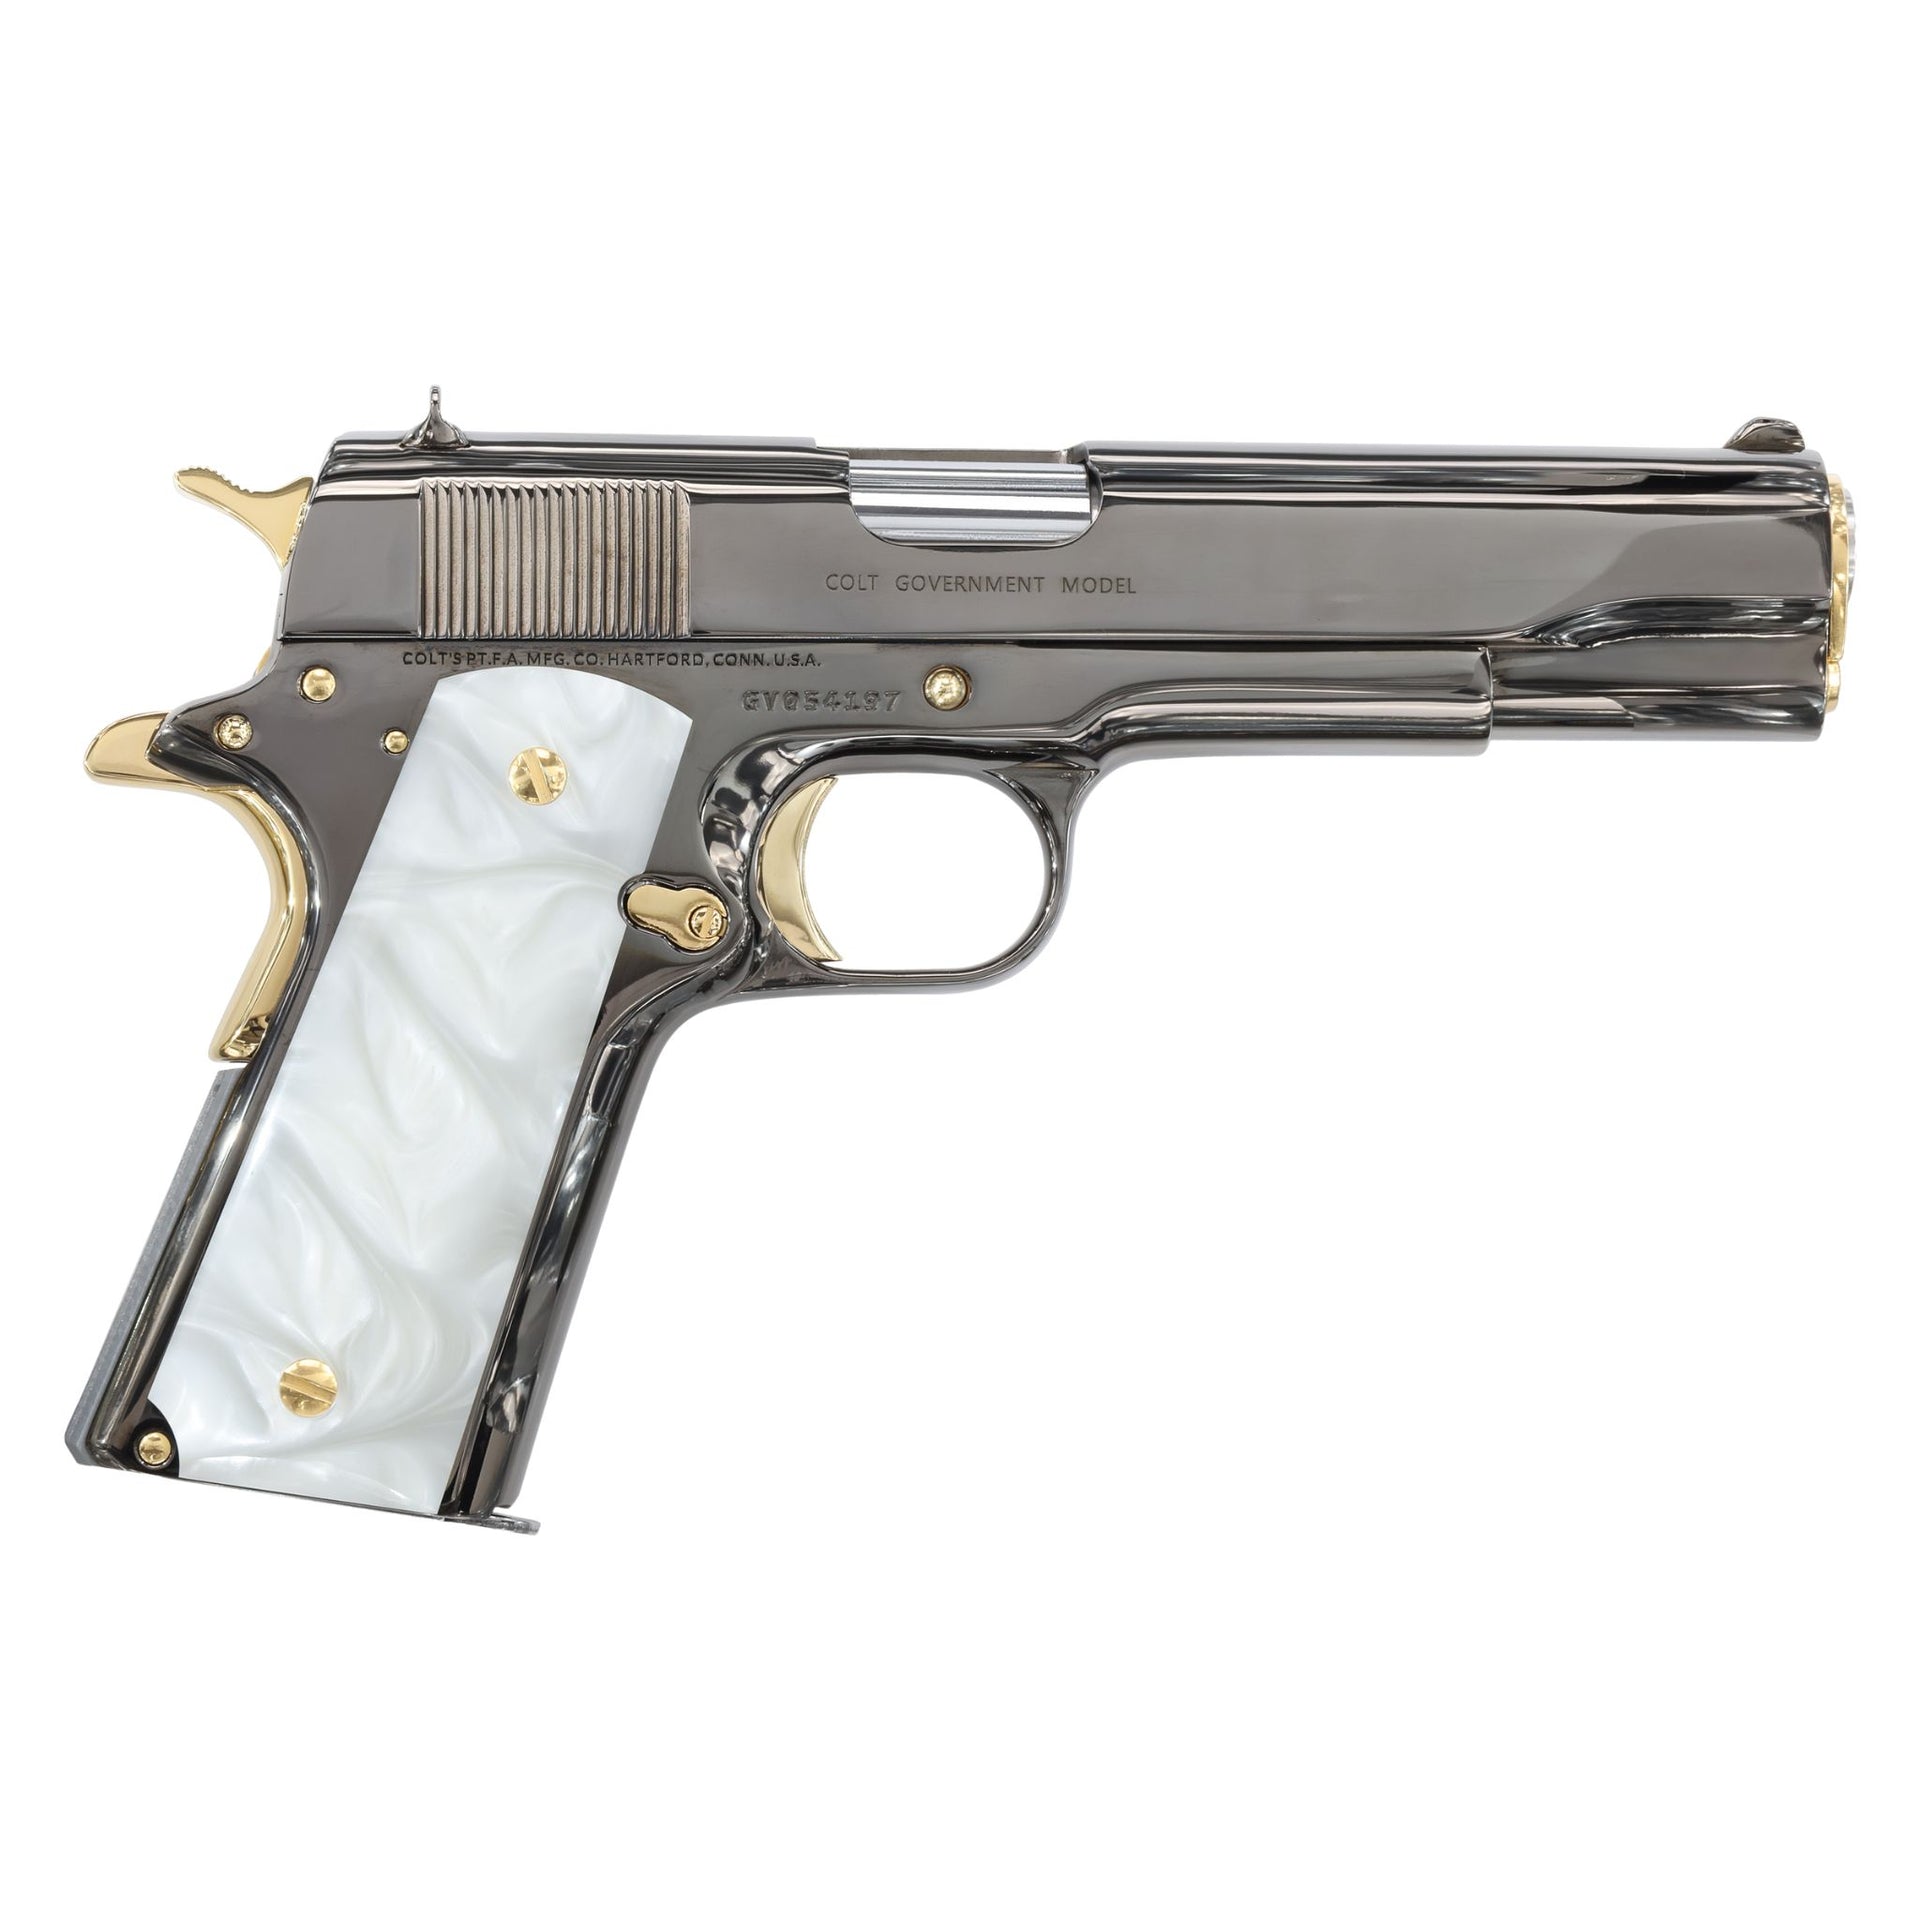 COLT 1911 Government, 45ACP, Mirror Finish Black Chrome with 24K Gold Plated Accents, White Pearlized-Polymer Grips